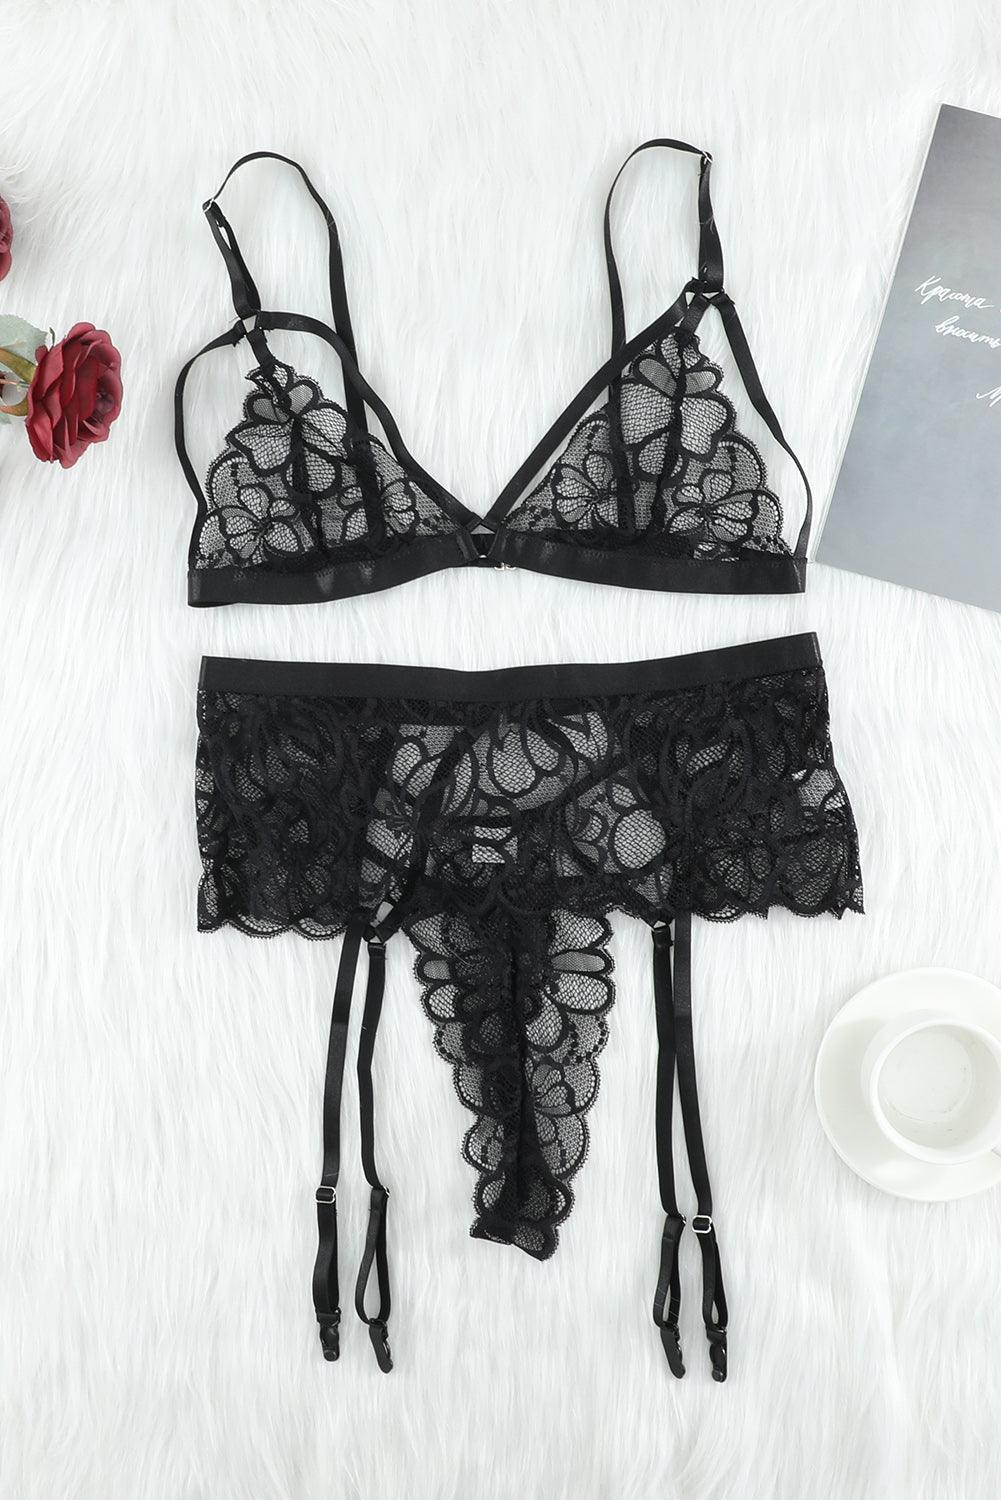 Strappy Three-Piece Lace Lingerie Set - Flyclothing LLC